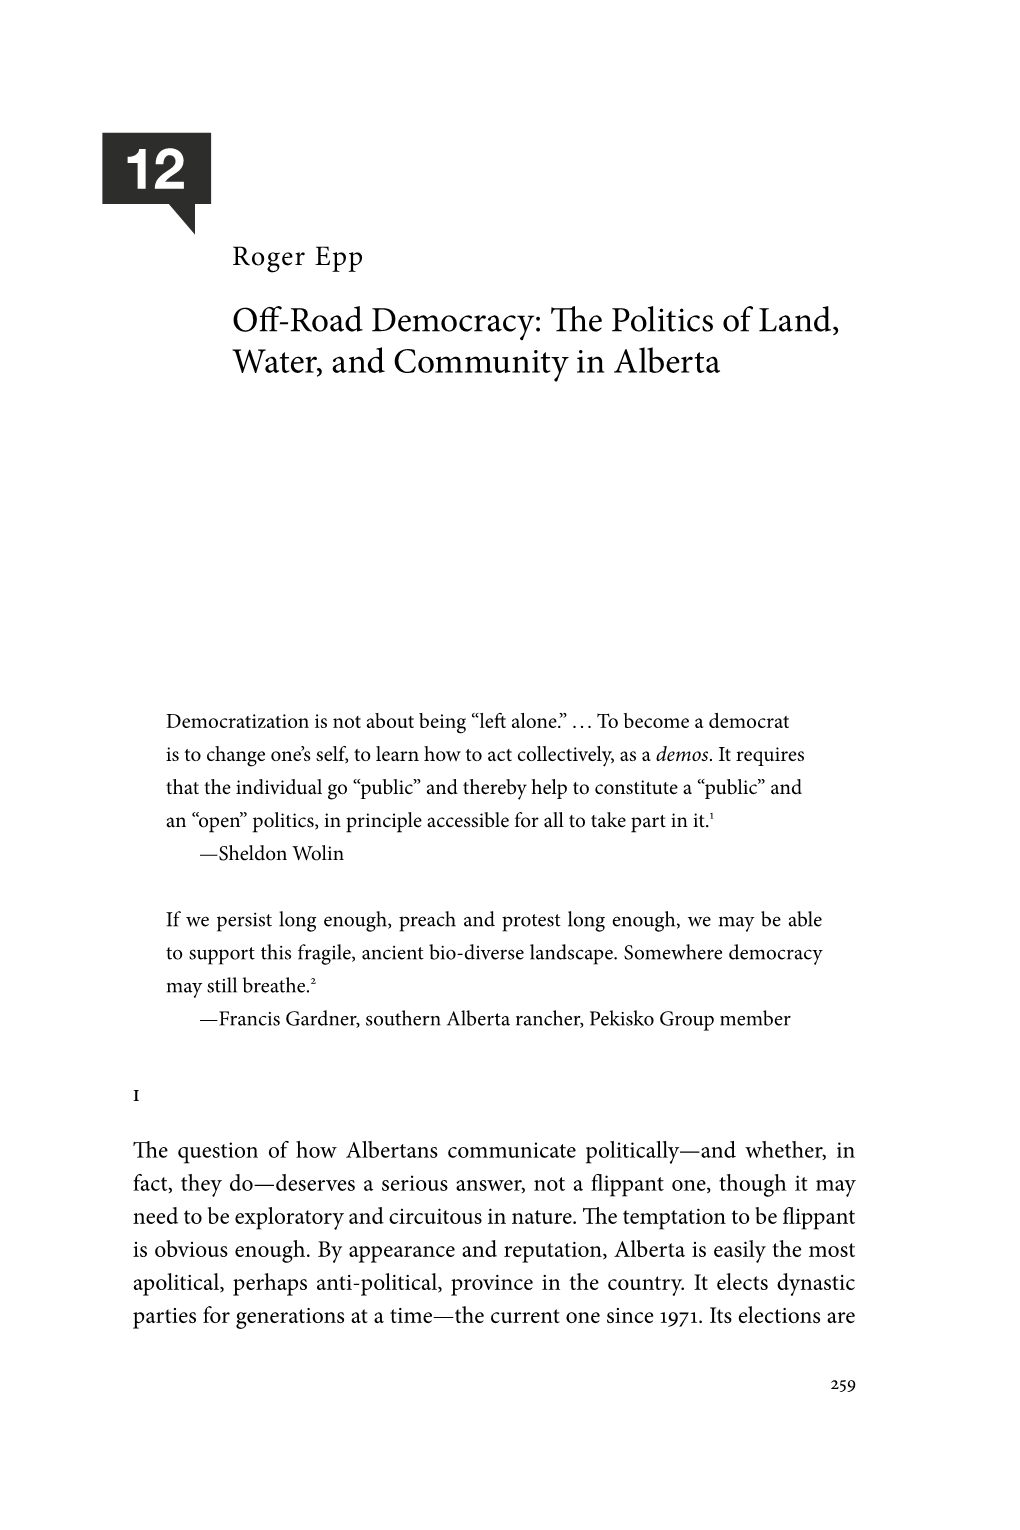 12. Off-Road Democracy: the Politics of Land, Water, and Community In